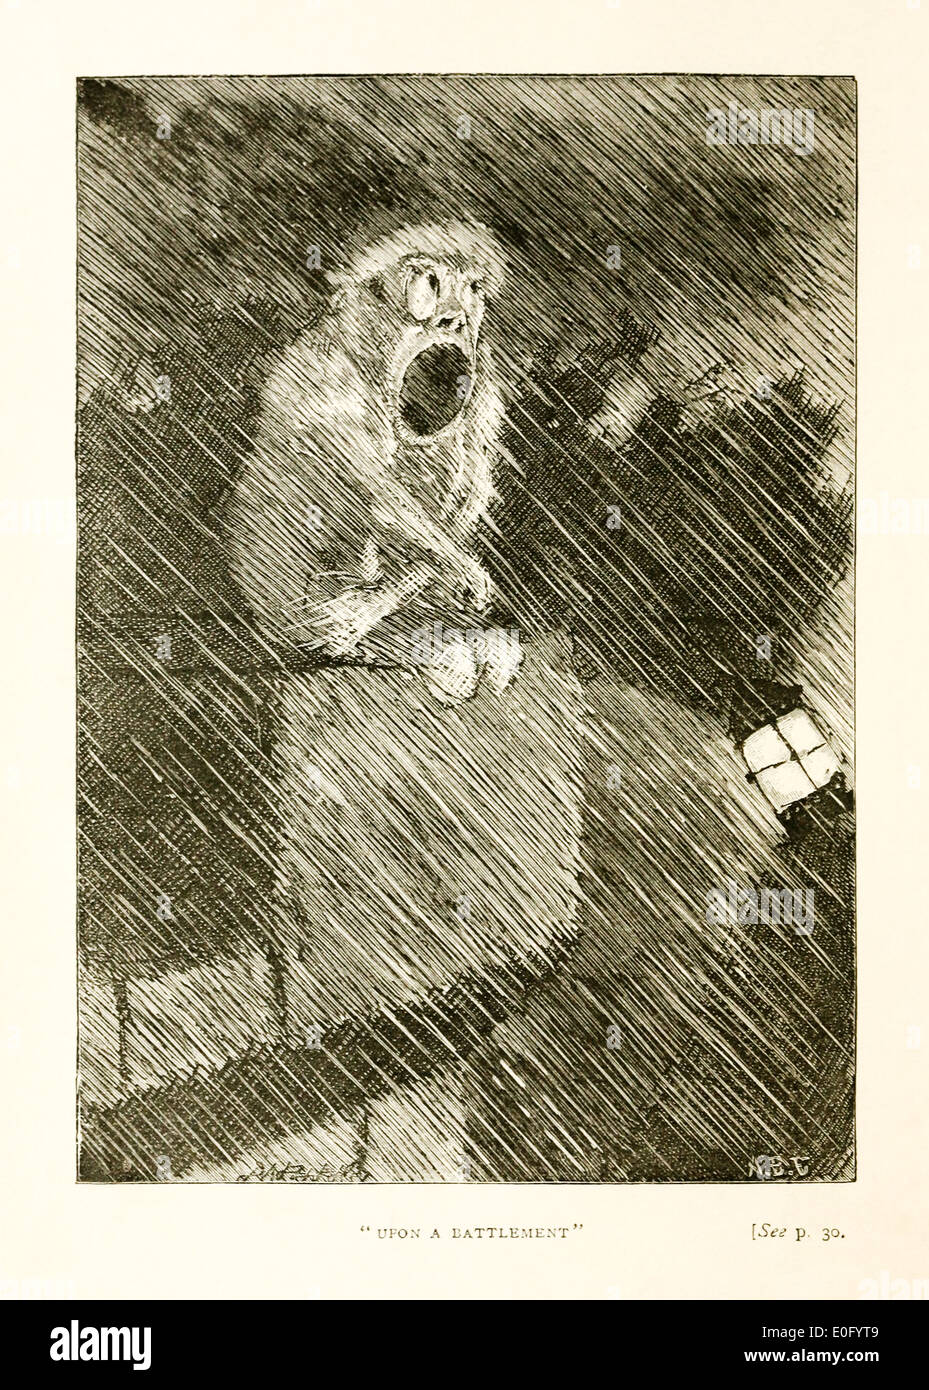 'Upon a Battlement'. Arthur Burdett Frost (1851-1928) Illustration from Lewis Carroll's poem 'Phantasmagoria' about a man called Tibbets talking to a ghost. From Canto 4. Hys Nouryture, howling in the rain on a castle. Image from 1883 first edition of 'Rhyme? And Reason?'. Stock Photo